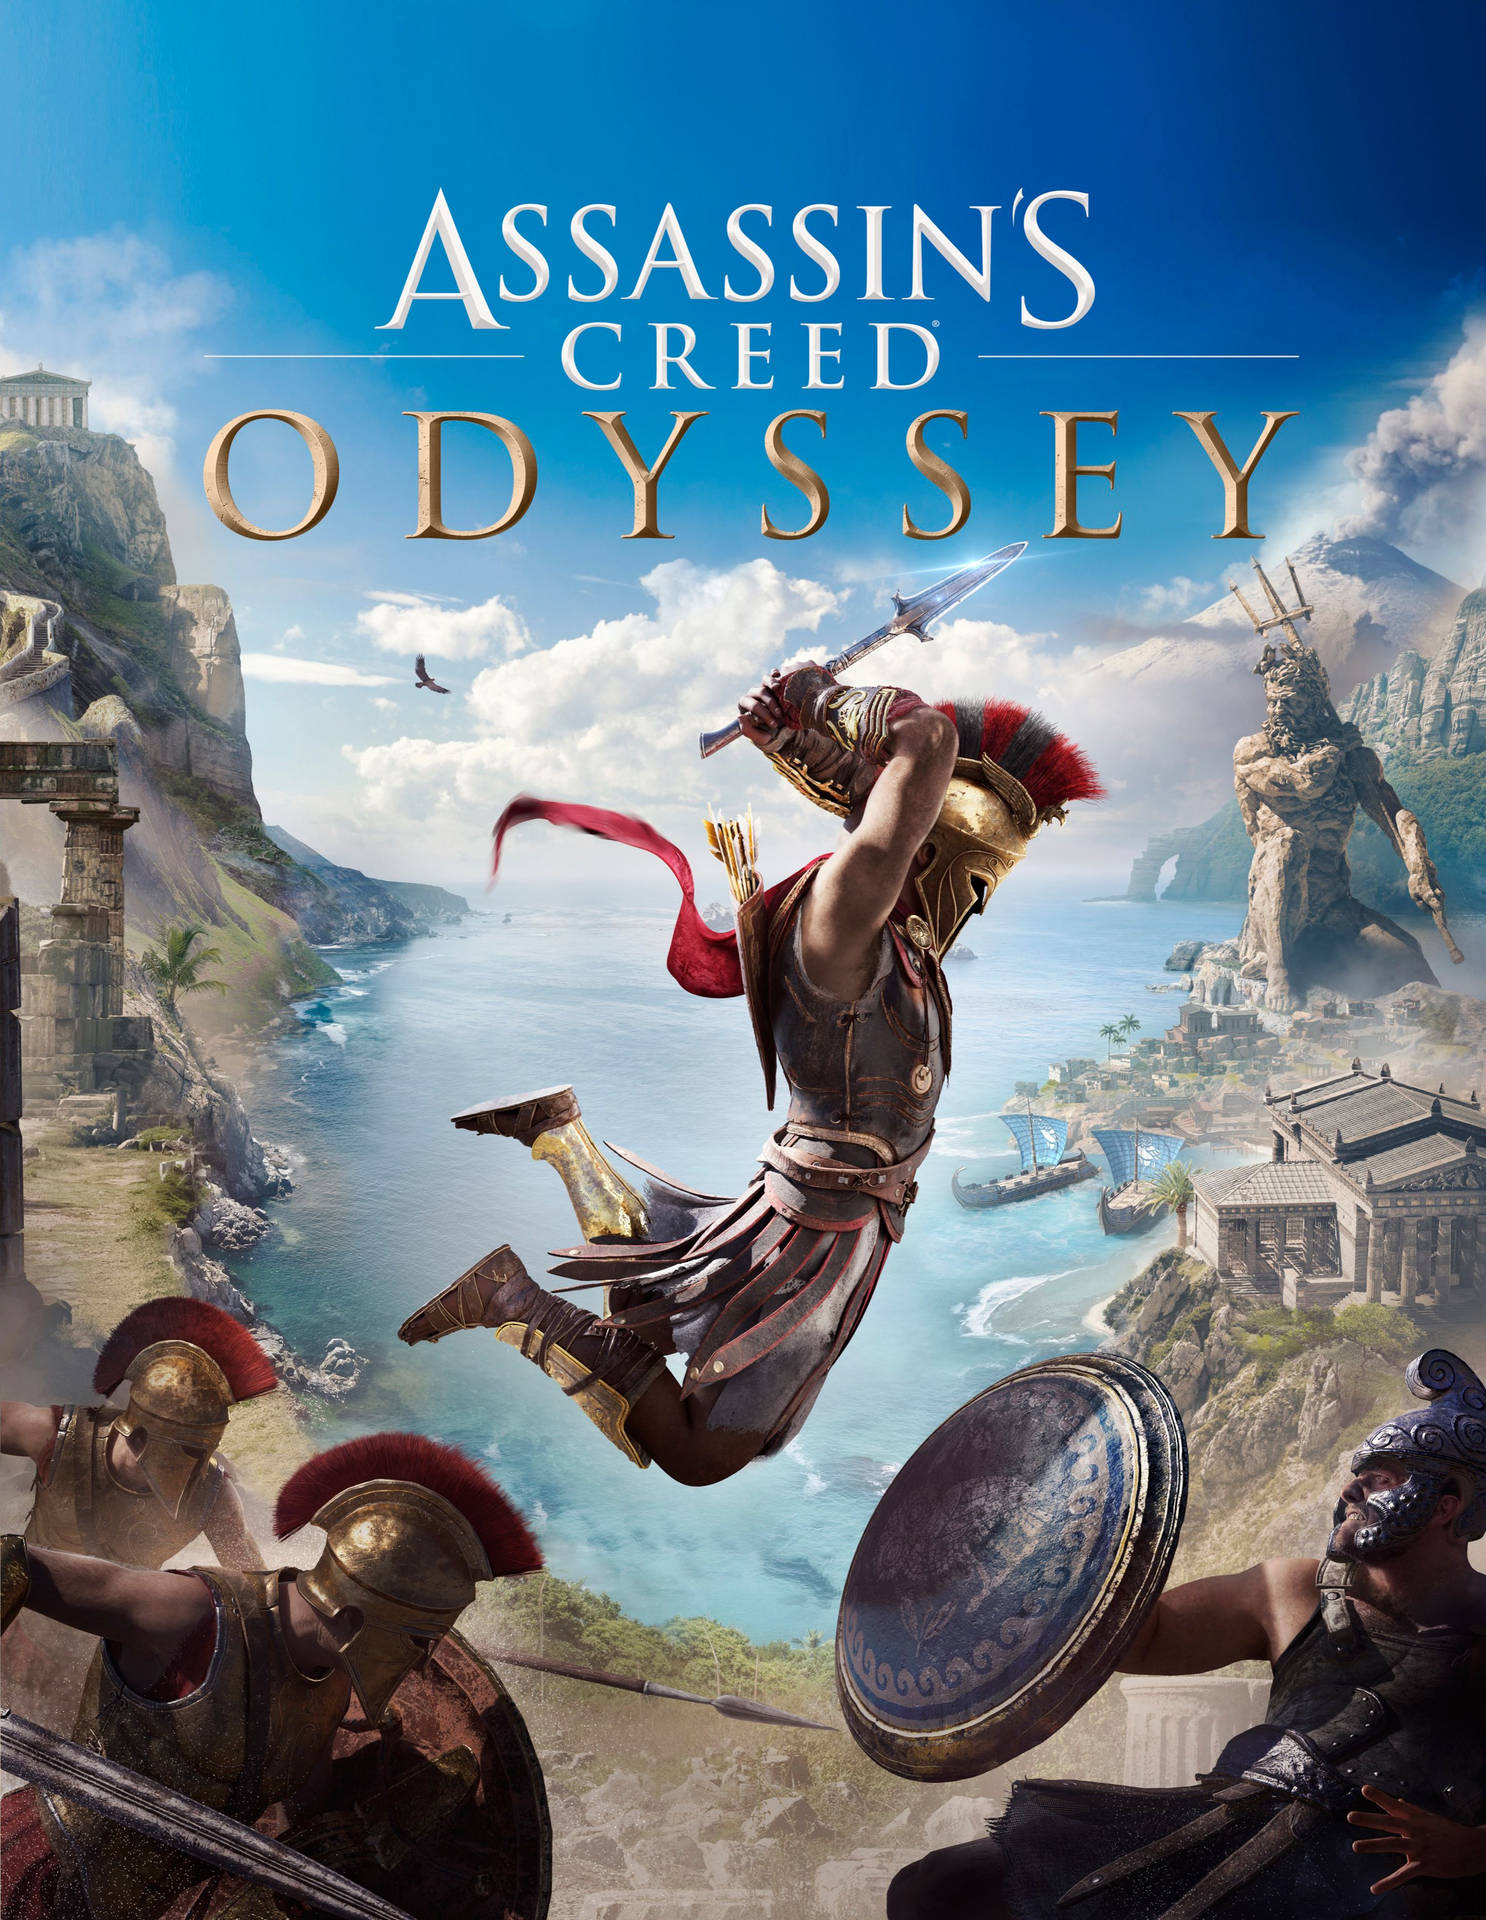 Assassin's Creed Odyssey Game Poster Wallpaper